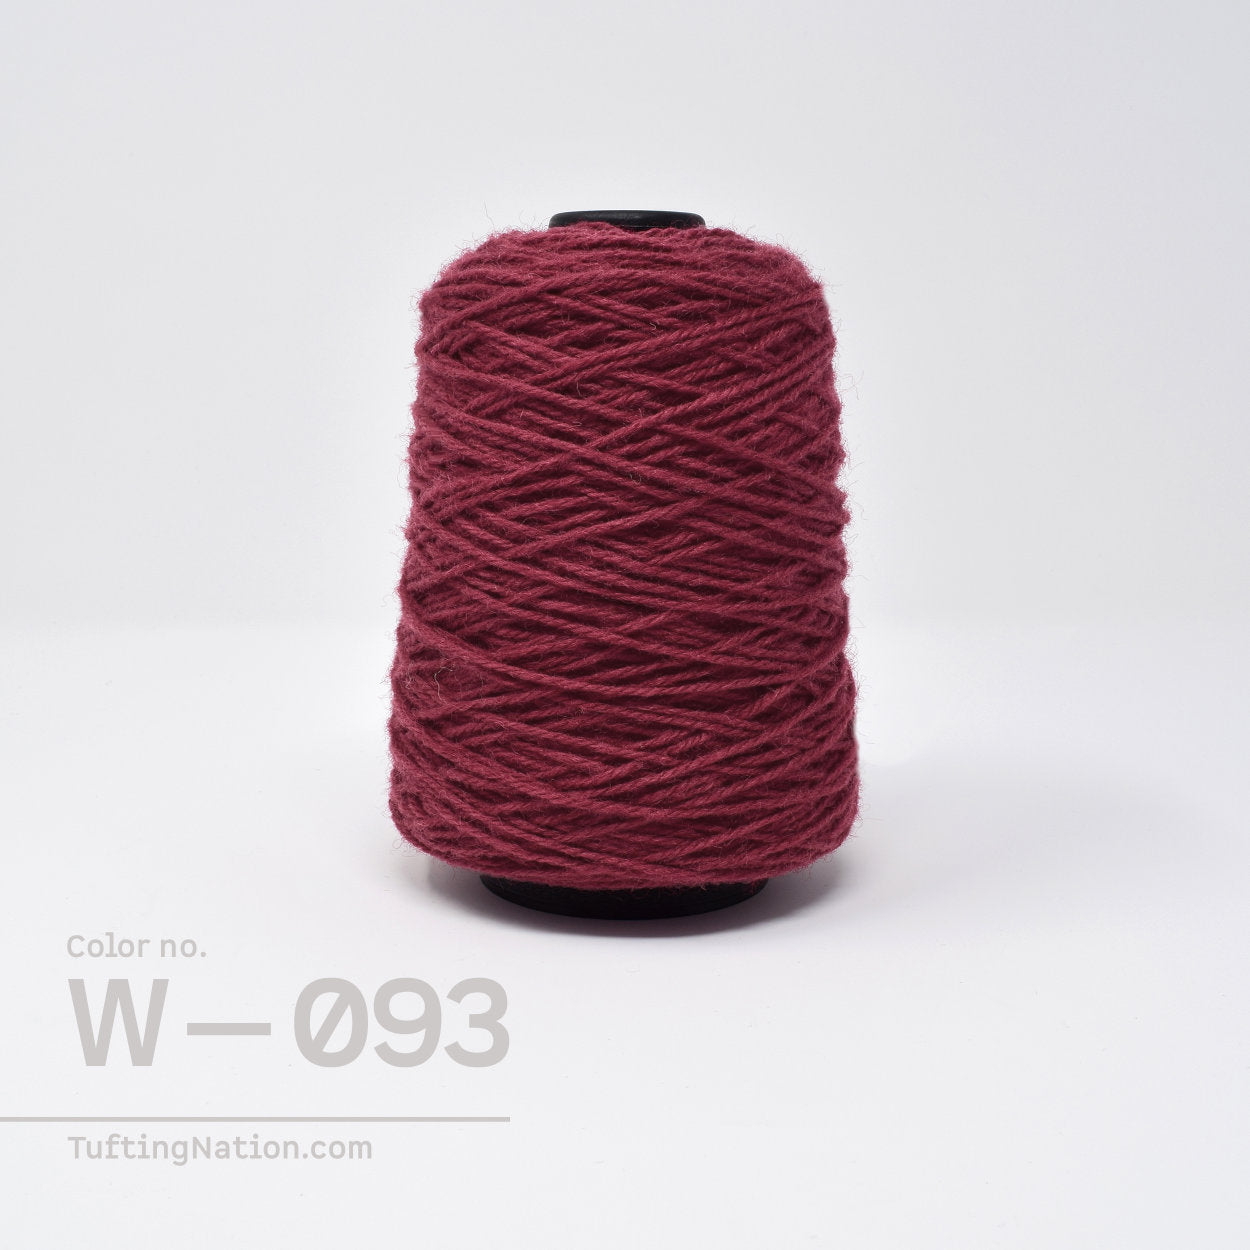 Raspberry Red Tufting Yarn On Spool for Rug Tufting, Weaving and Punch Needle | TuftingNation